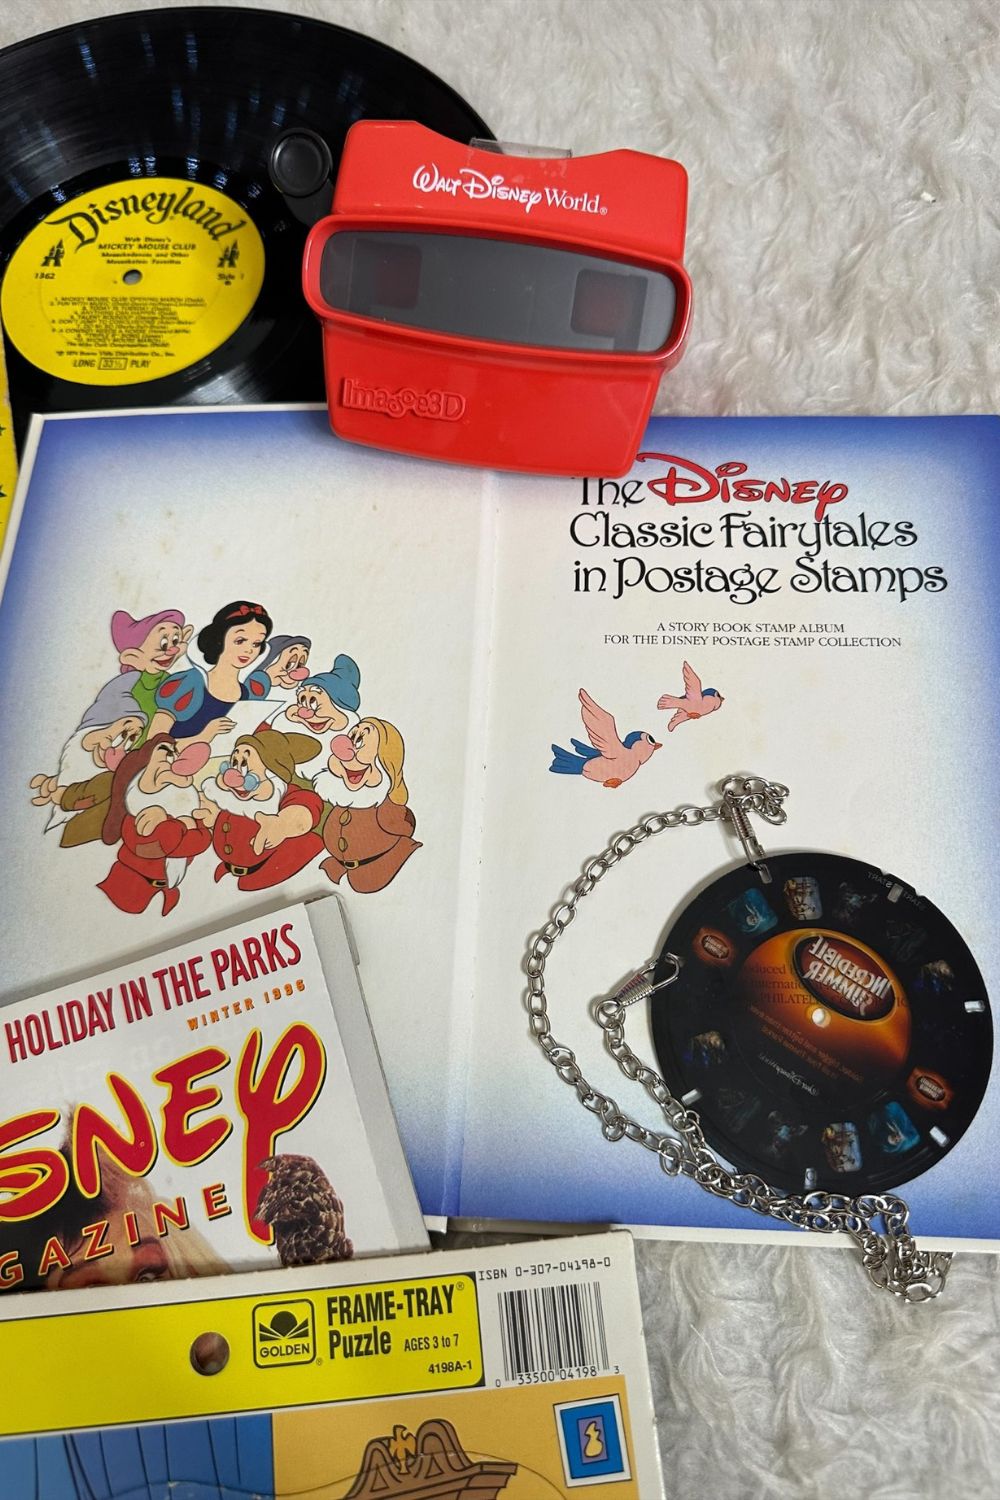 THE DISNEY CLASSIC FAIRYTALES IN POSTAGE STAMPS BOOK*